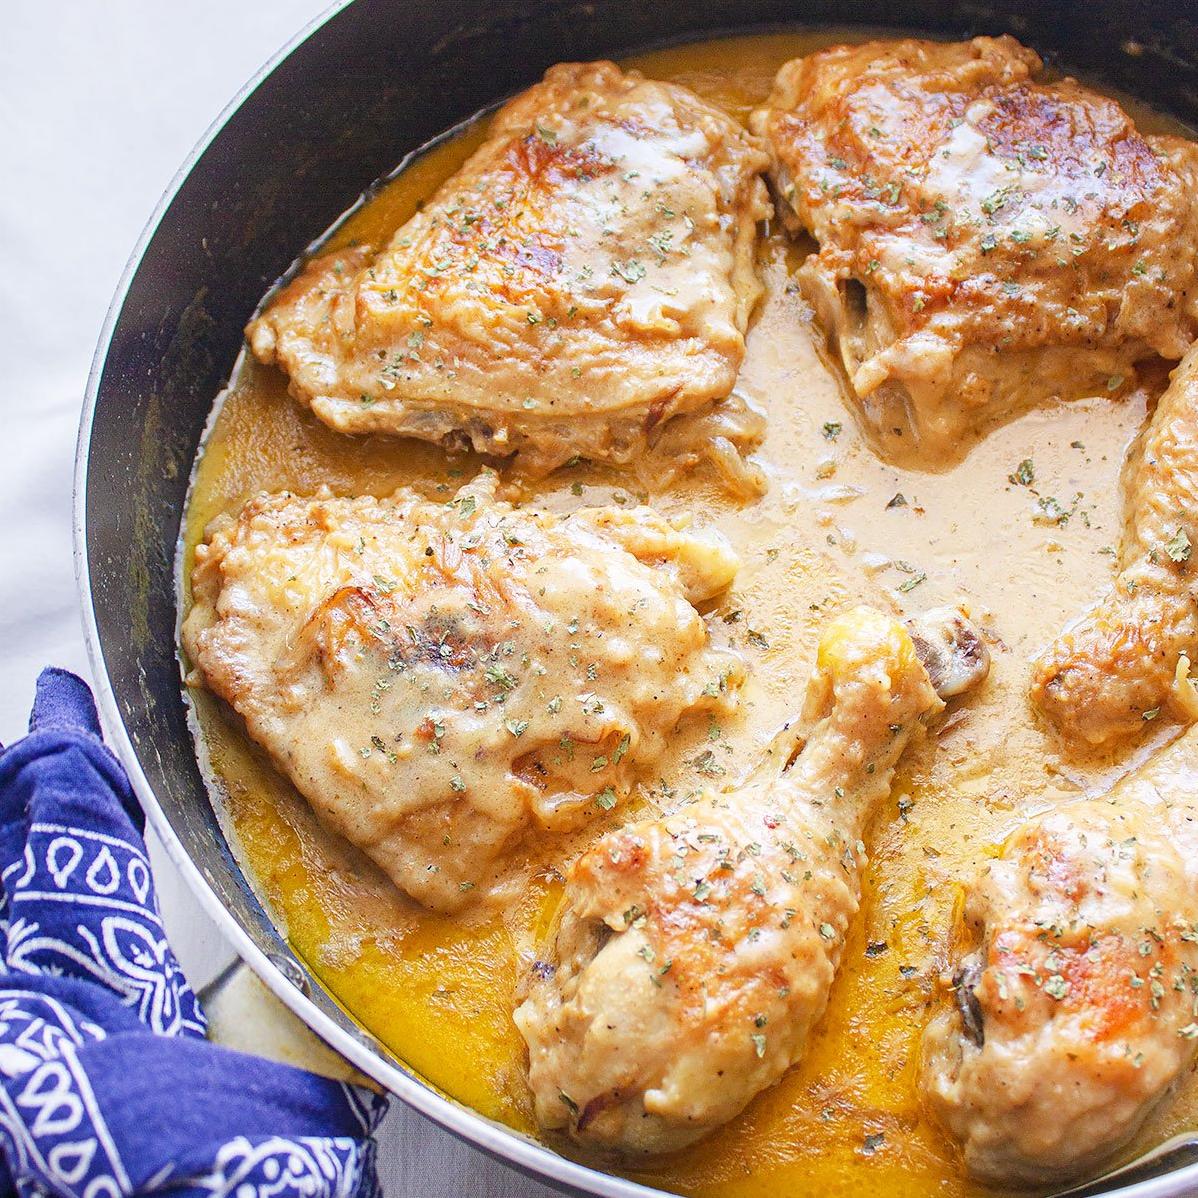  Juicy chicken thighs smothered in rich and creamy gravy